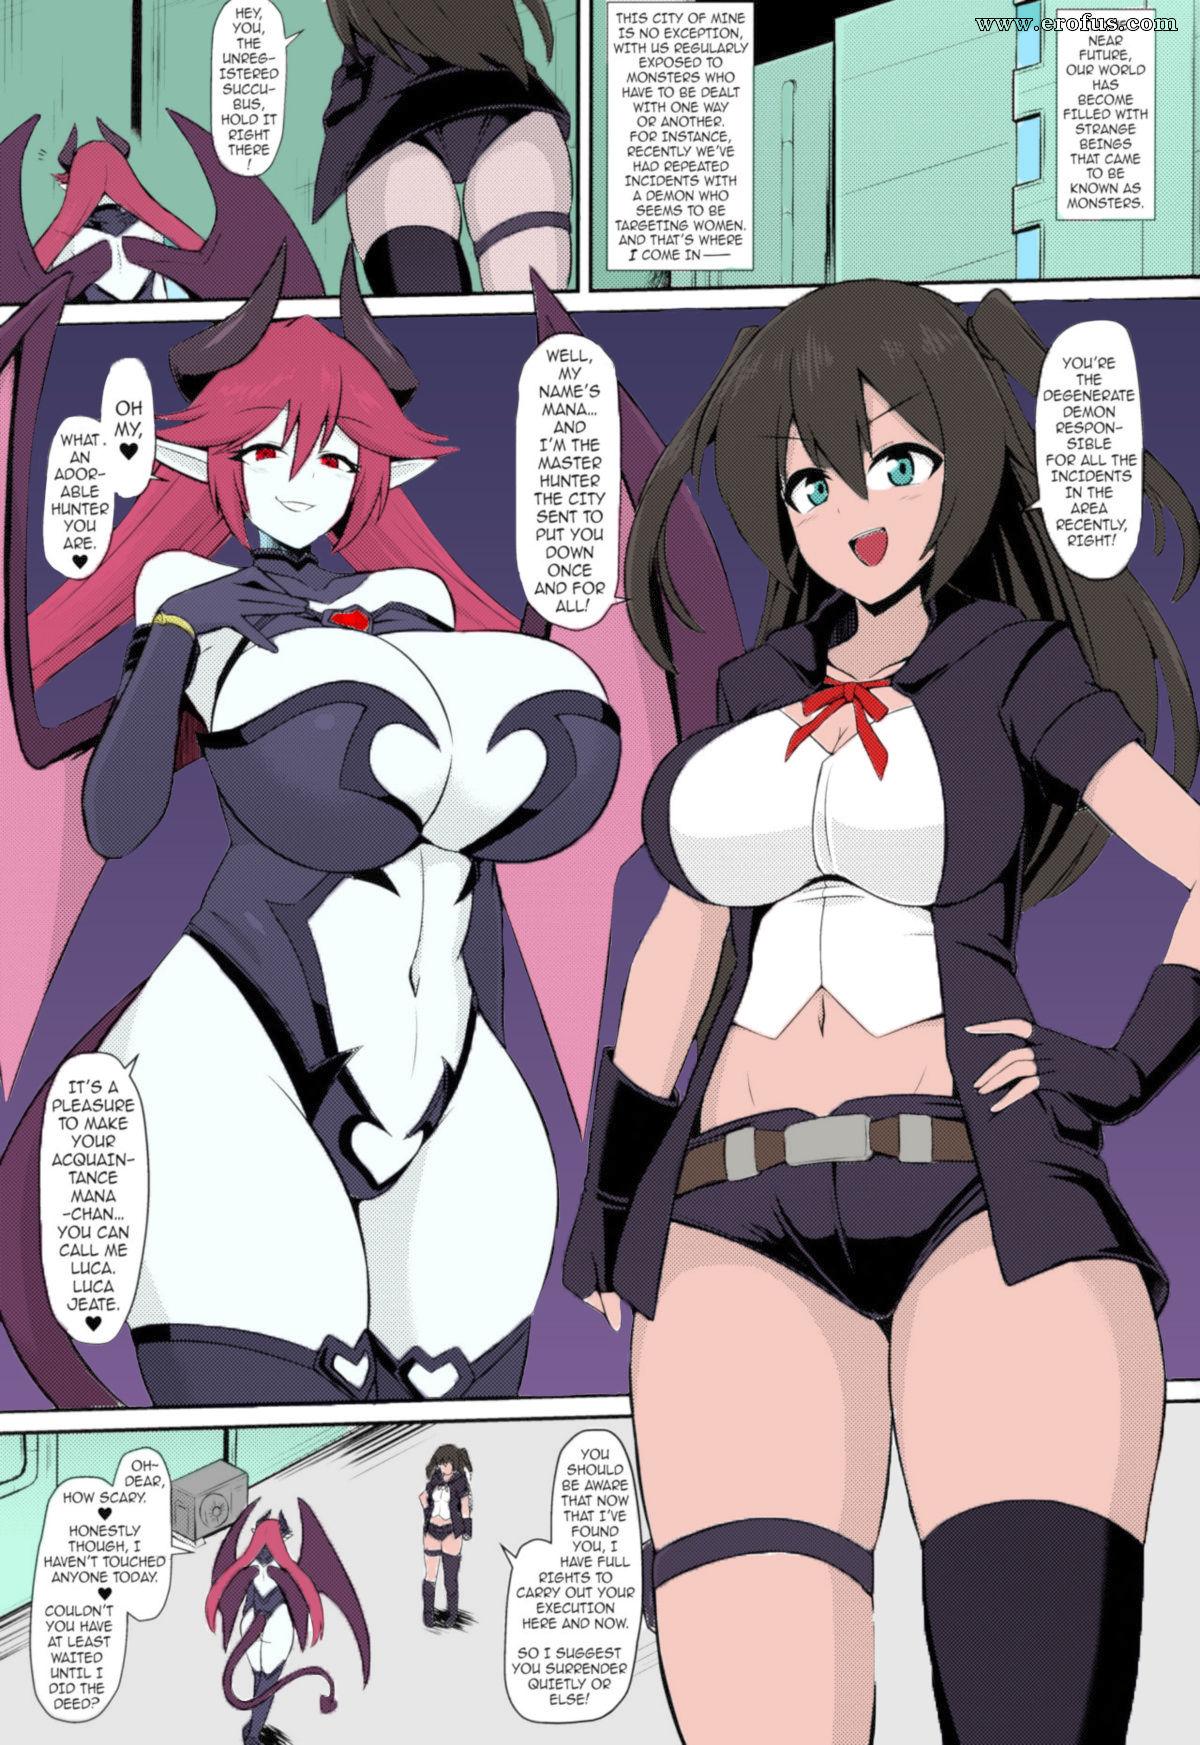 Cock A Lesbian Succubu´s Lust Crest Pleasure Training - COLOR- Ongoing Sharing - Page 2